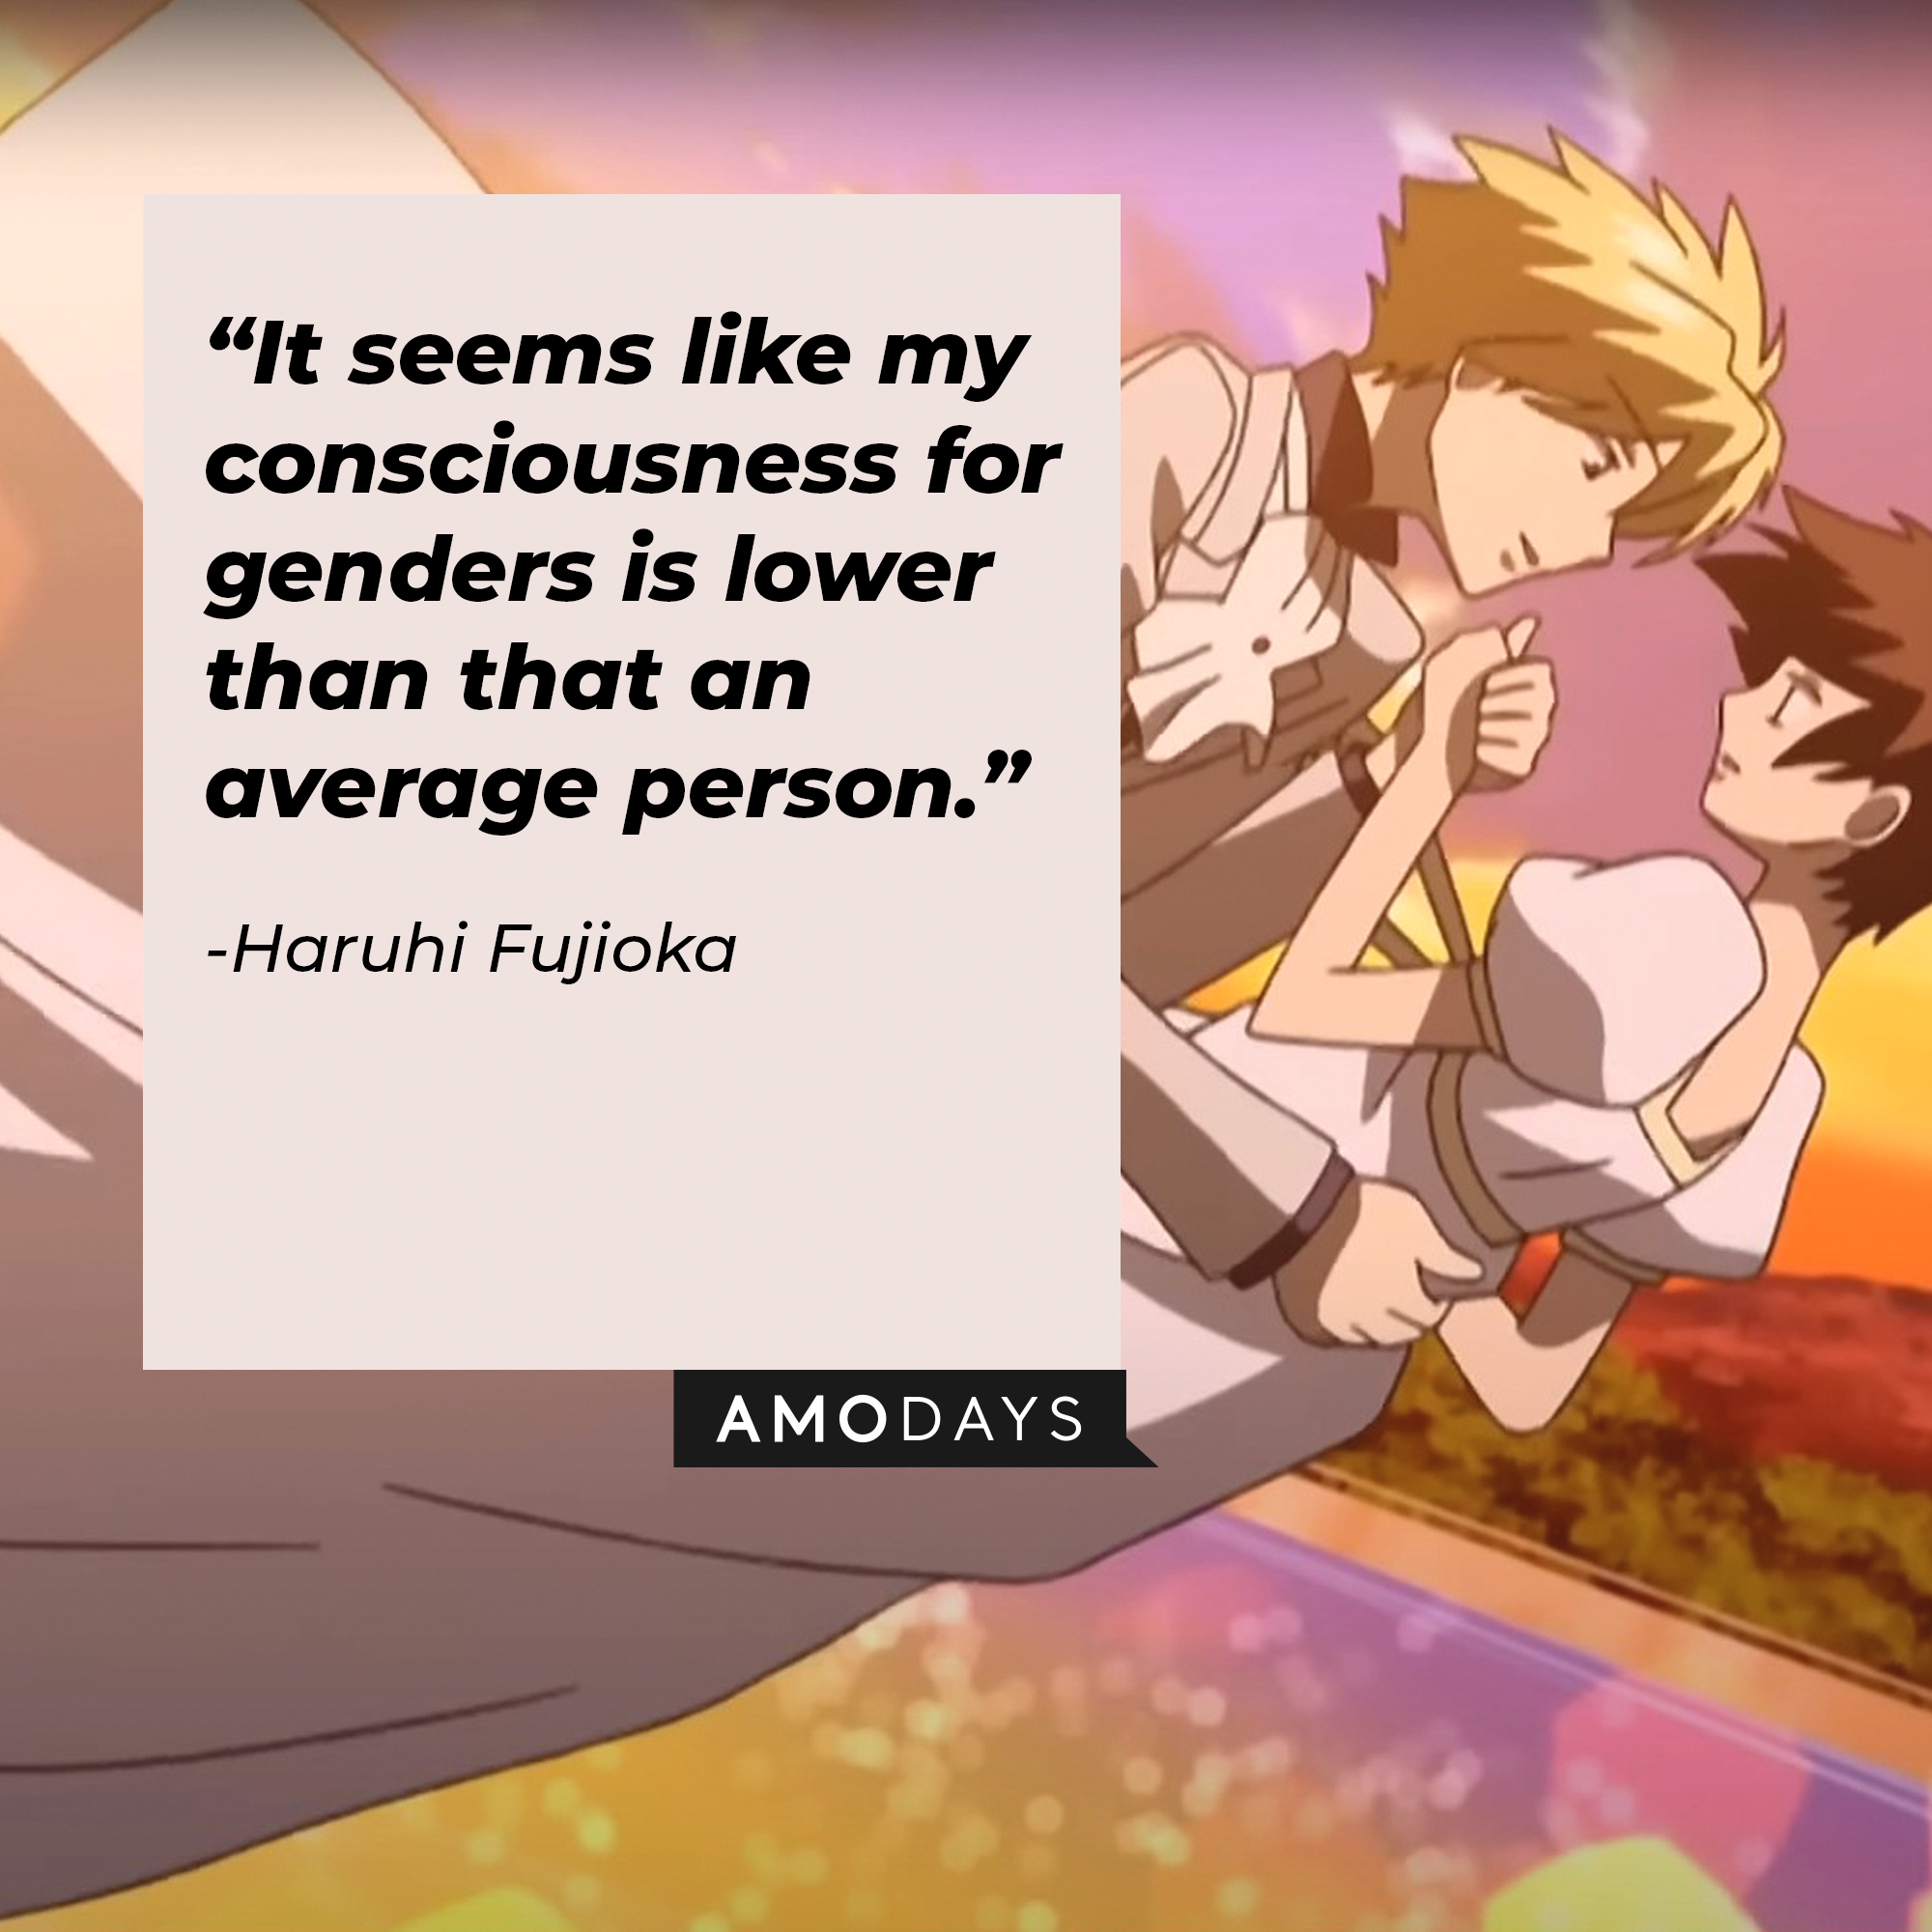 A picture of the anime character Haruhi Fujioka and Tamaki Suoh with a quote by Fujioka  that reads, “It seems like my consciousness for genders is lower than that an average person.” | Image: facebook.com/theouranhostclub